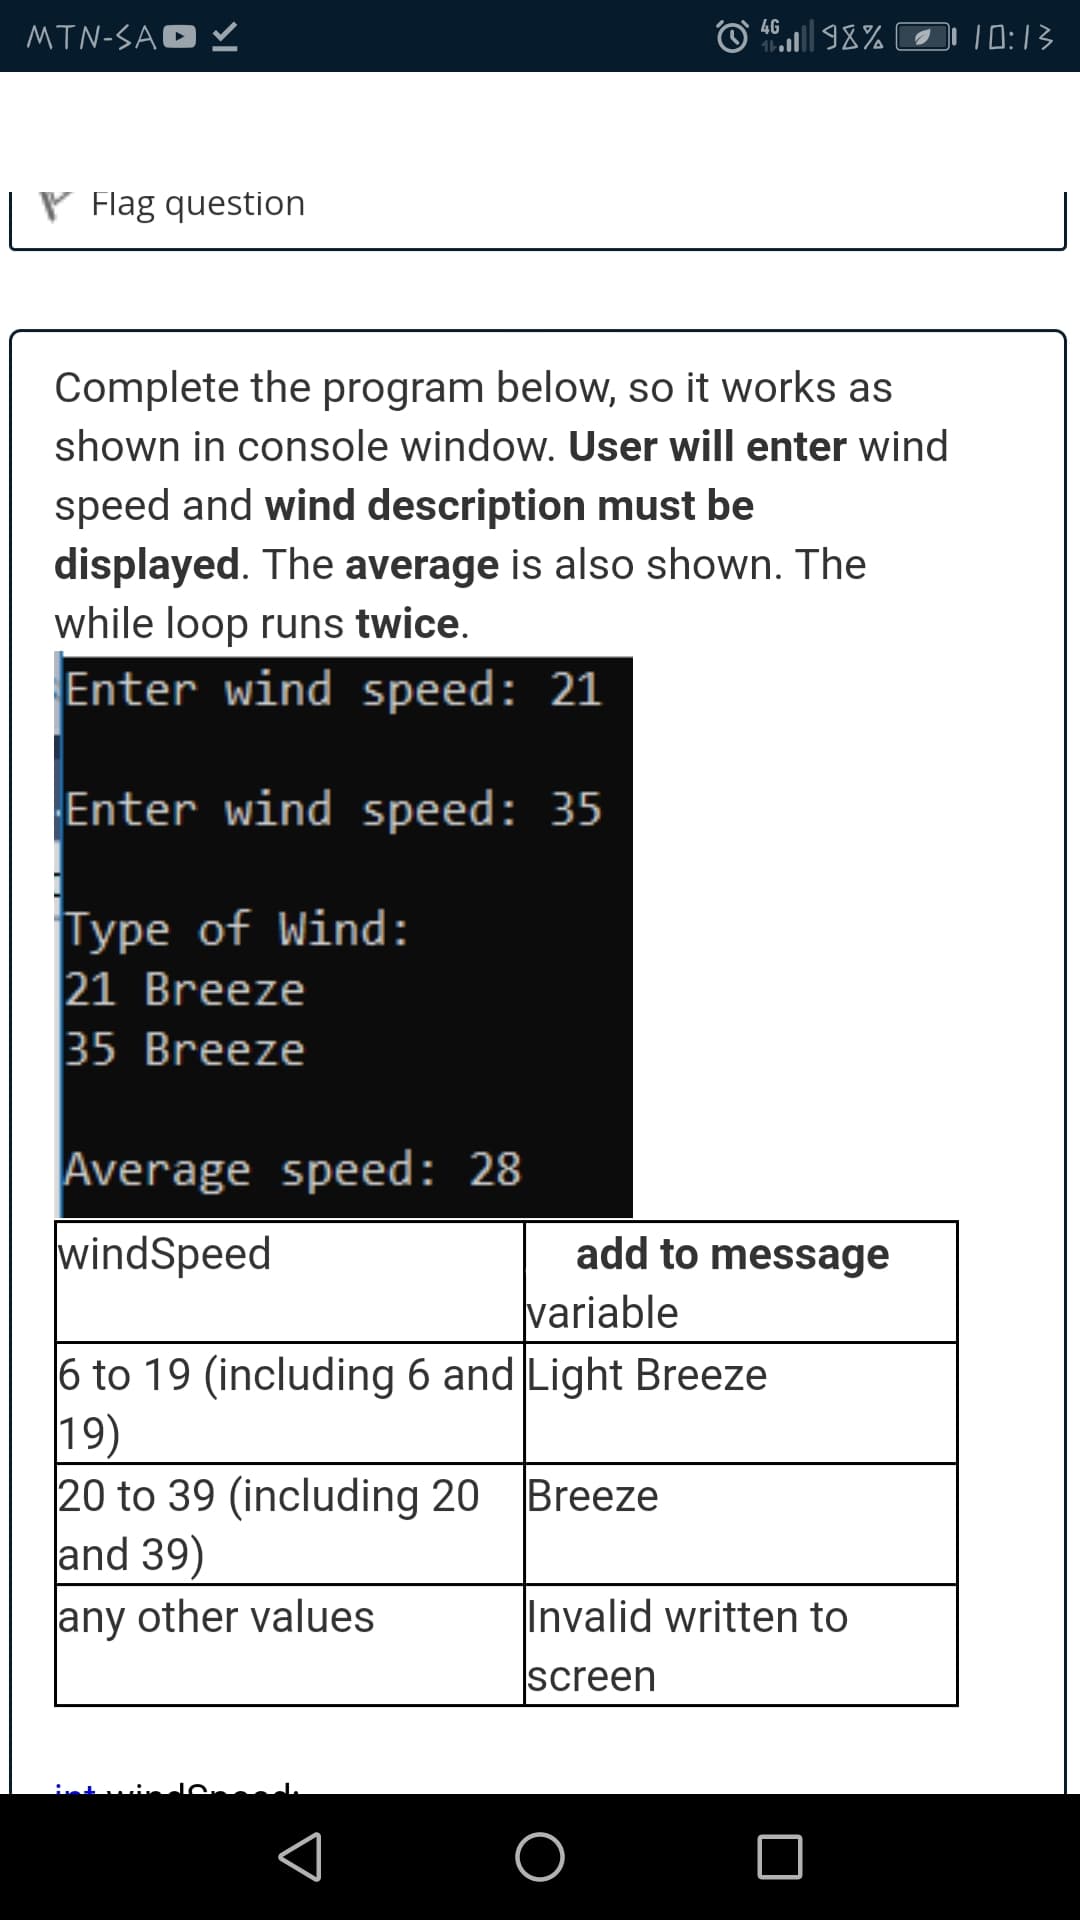 4G
MTN-SAO V
O 98% O0:13
V Flag question
Complete the program below, so it works as
shown in console window. User will enter wind
speed and wind description must be
displayed. The average is also shown. The
while loop runs twice.
Enter wind speed: 21
Enter wind speed: 35
Type of Wind:
21 Breeze
35 Breeze
Average speed: 28
windSpeed
add to message
variable
6 to 19 (including 6 and Light Breeze
19)
20 to 39 (including 20 Breeze
and 39)
any other values
Invalid written to
screen
